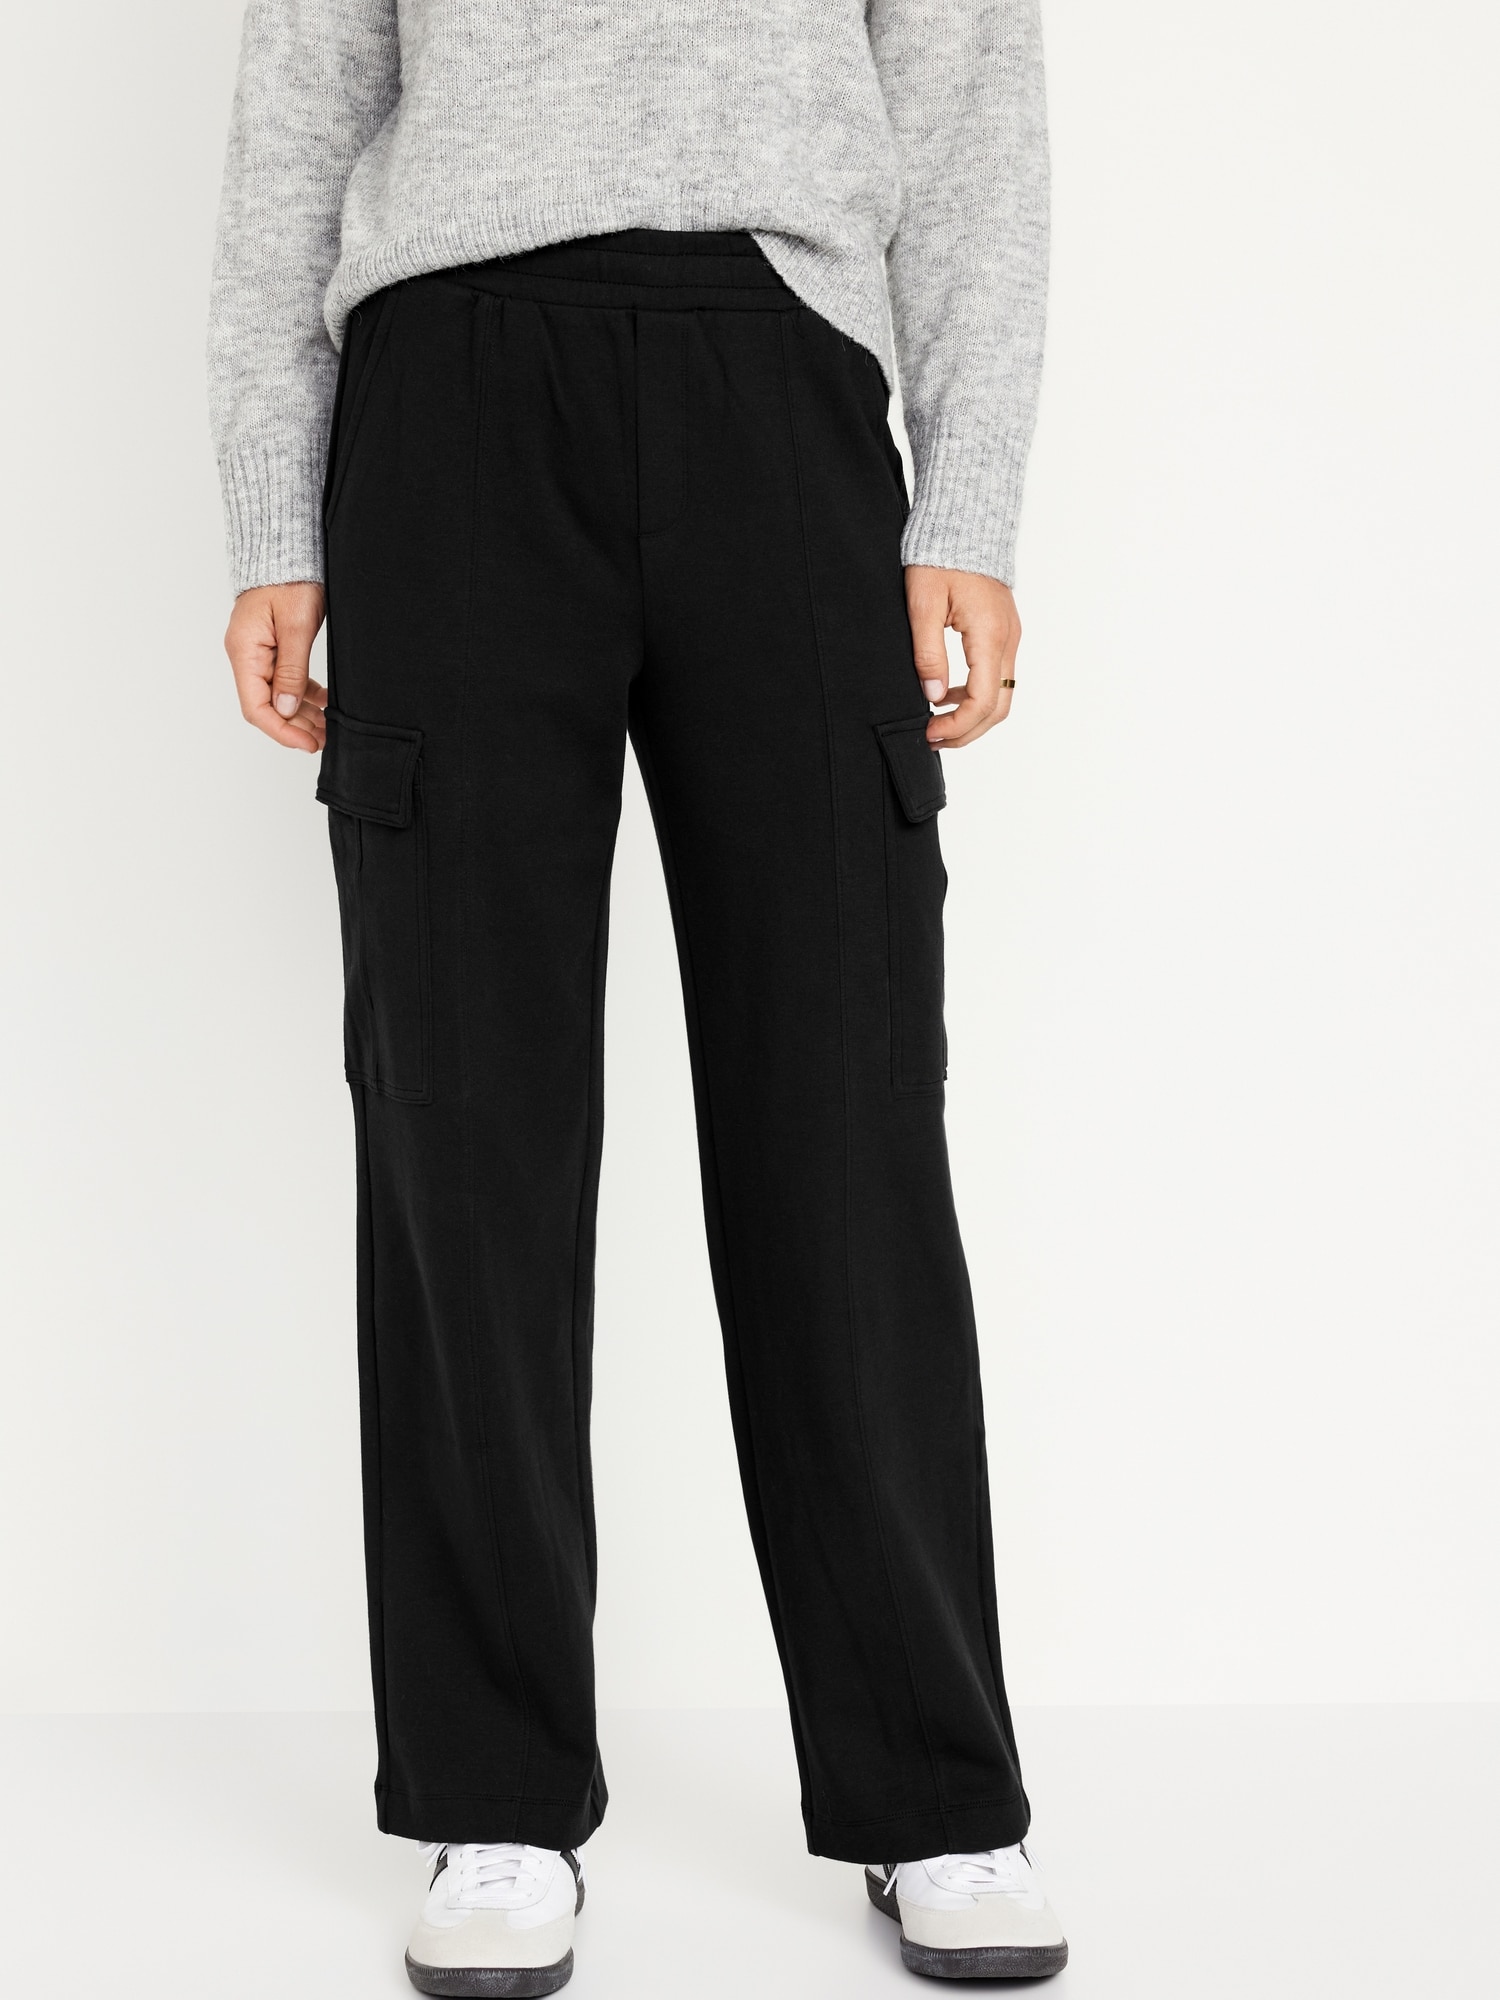 Women's Pants with Phone Pockets